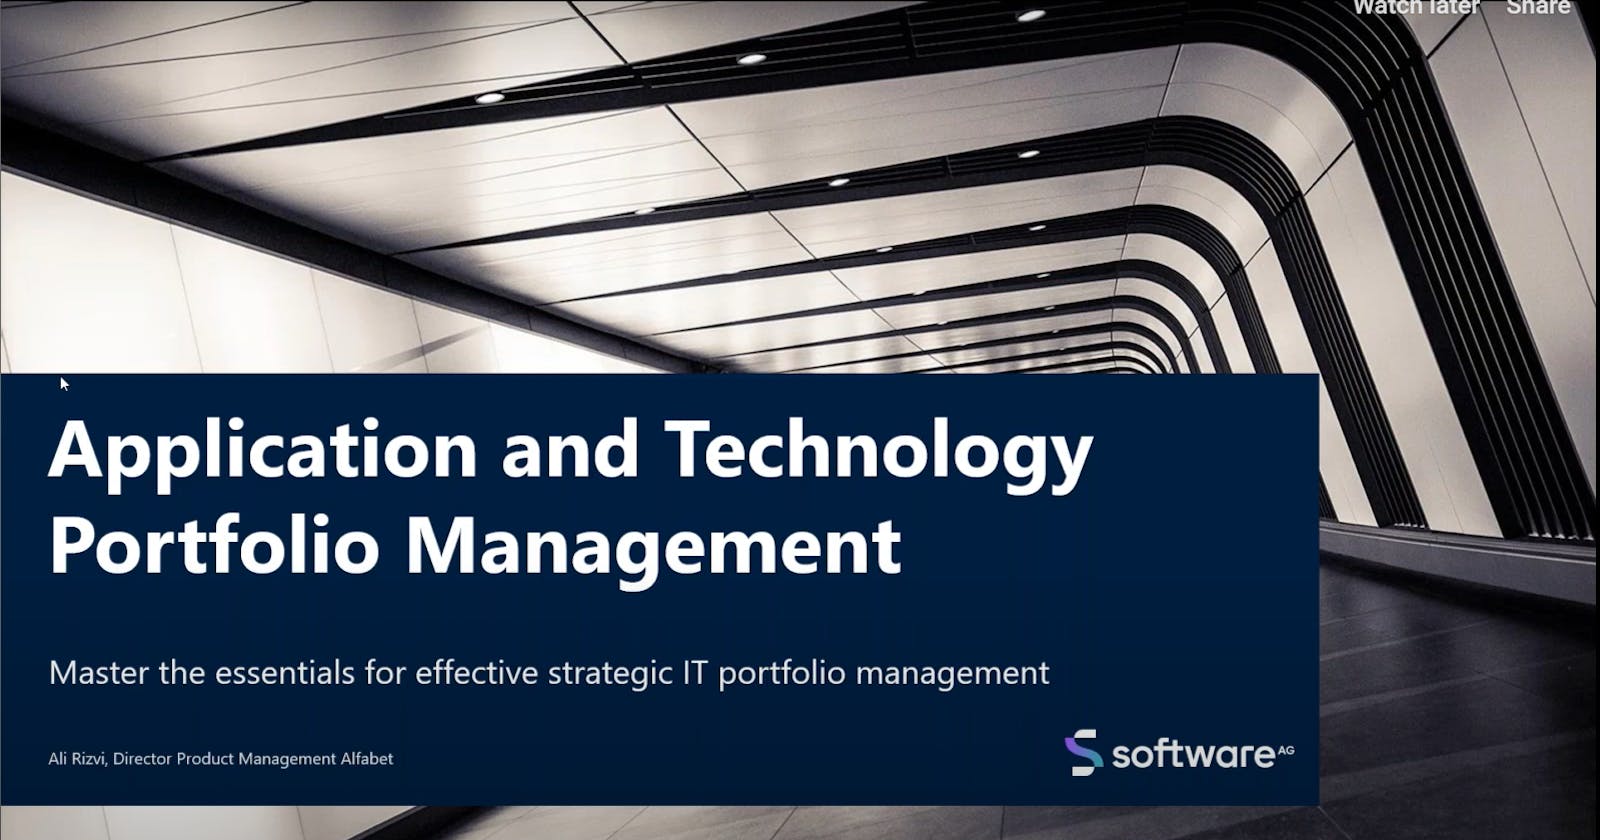 Application and Technology Portfolio Management: Master the essentials for effective SPM